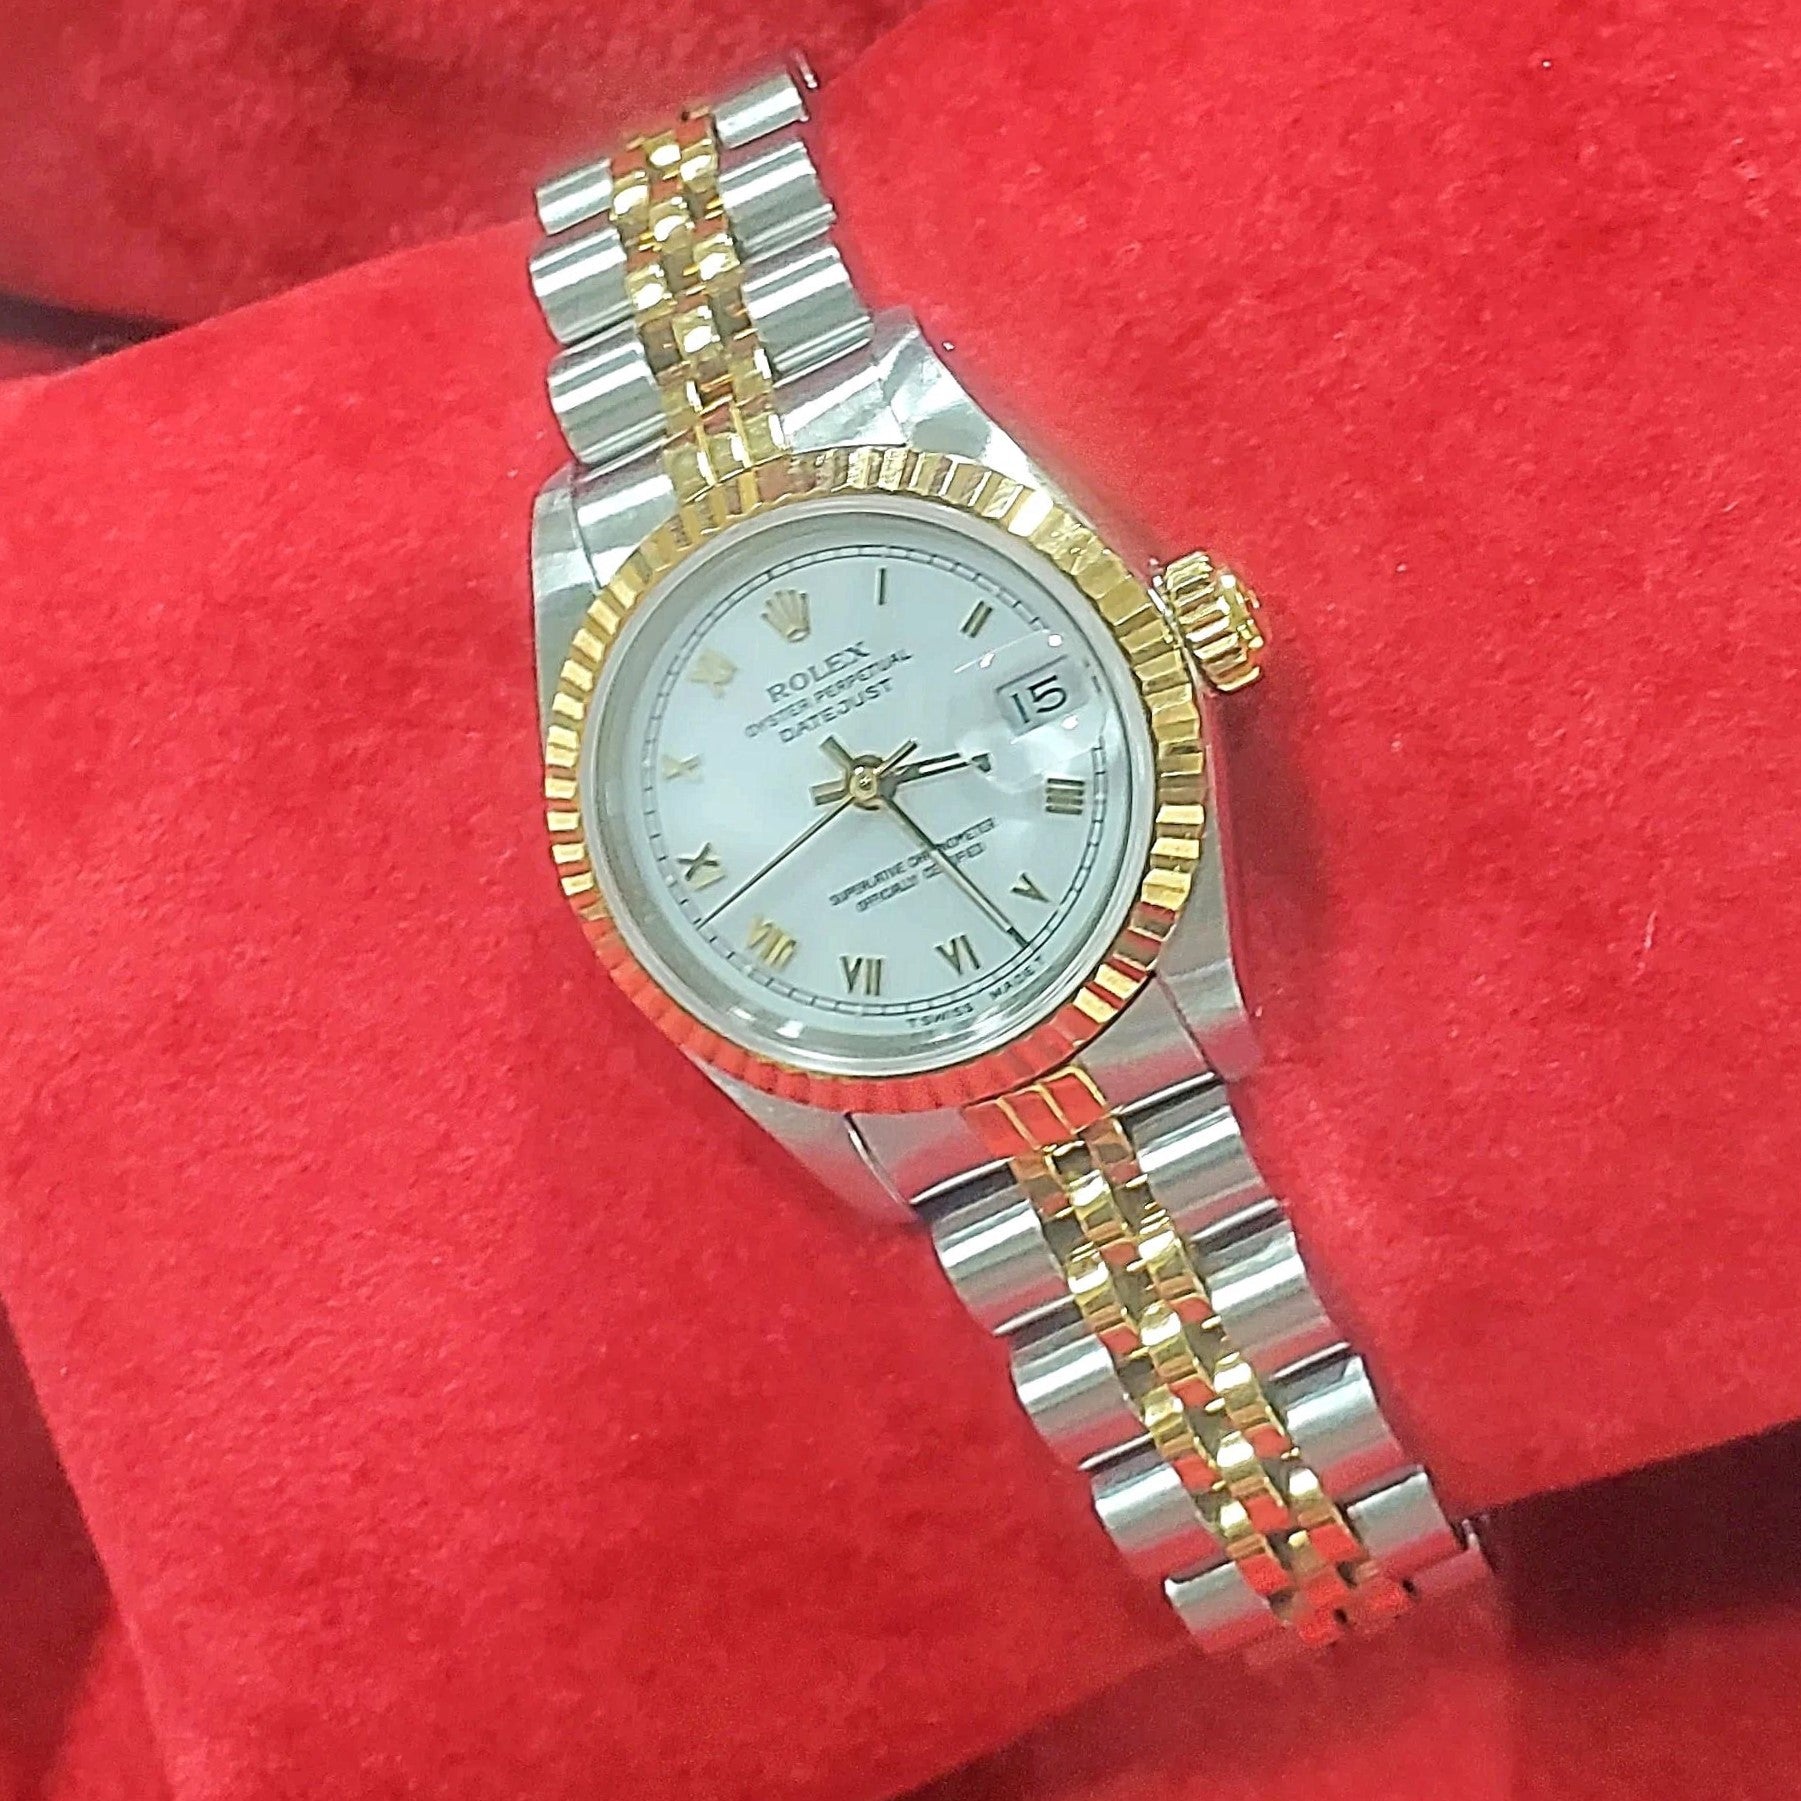 Women's Rolex 26mm DateJust Two-Tone 18K Gold Watch with White Dial, Fluted Bezel and Roman Numerals. (Pre-Owned)